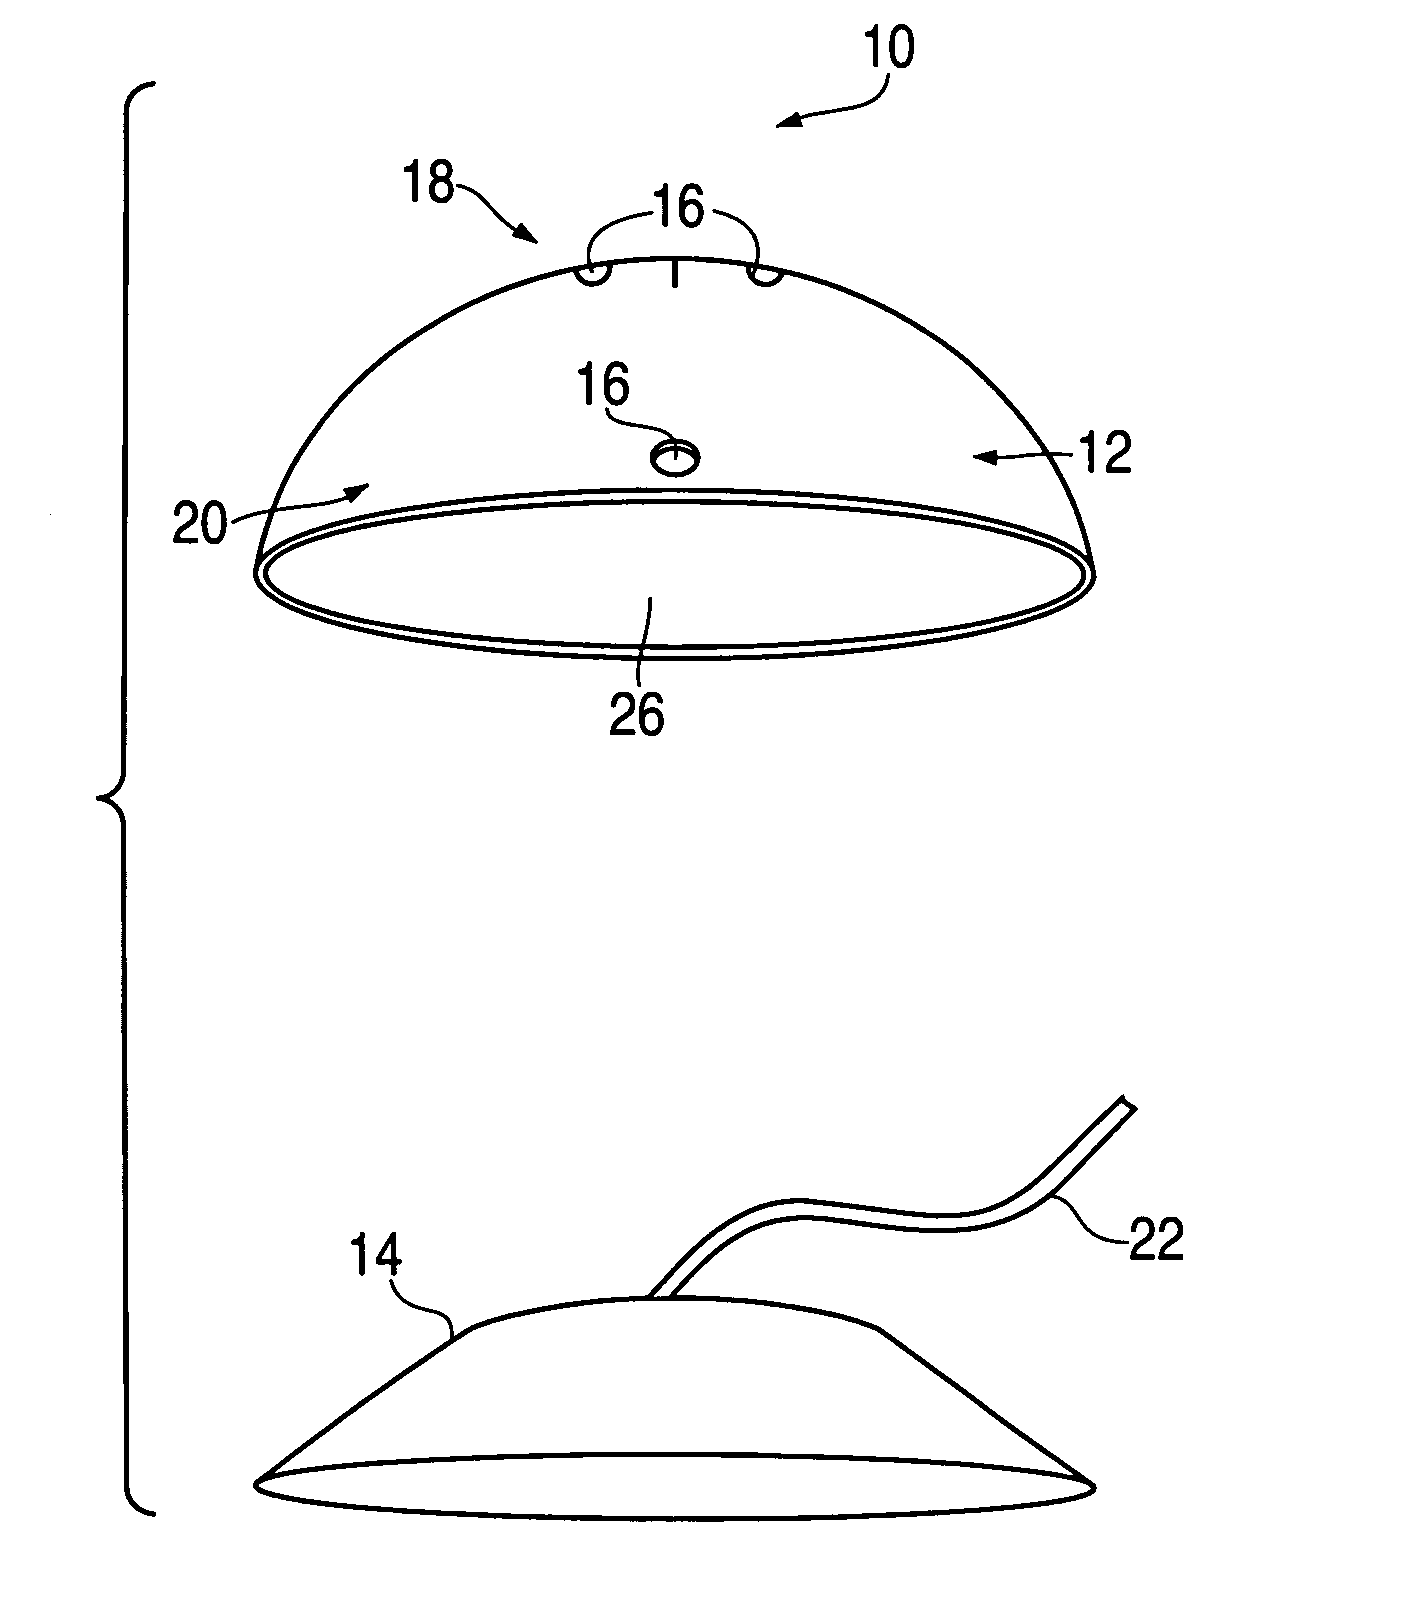 Device and method for prosthetic implant measurement